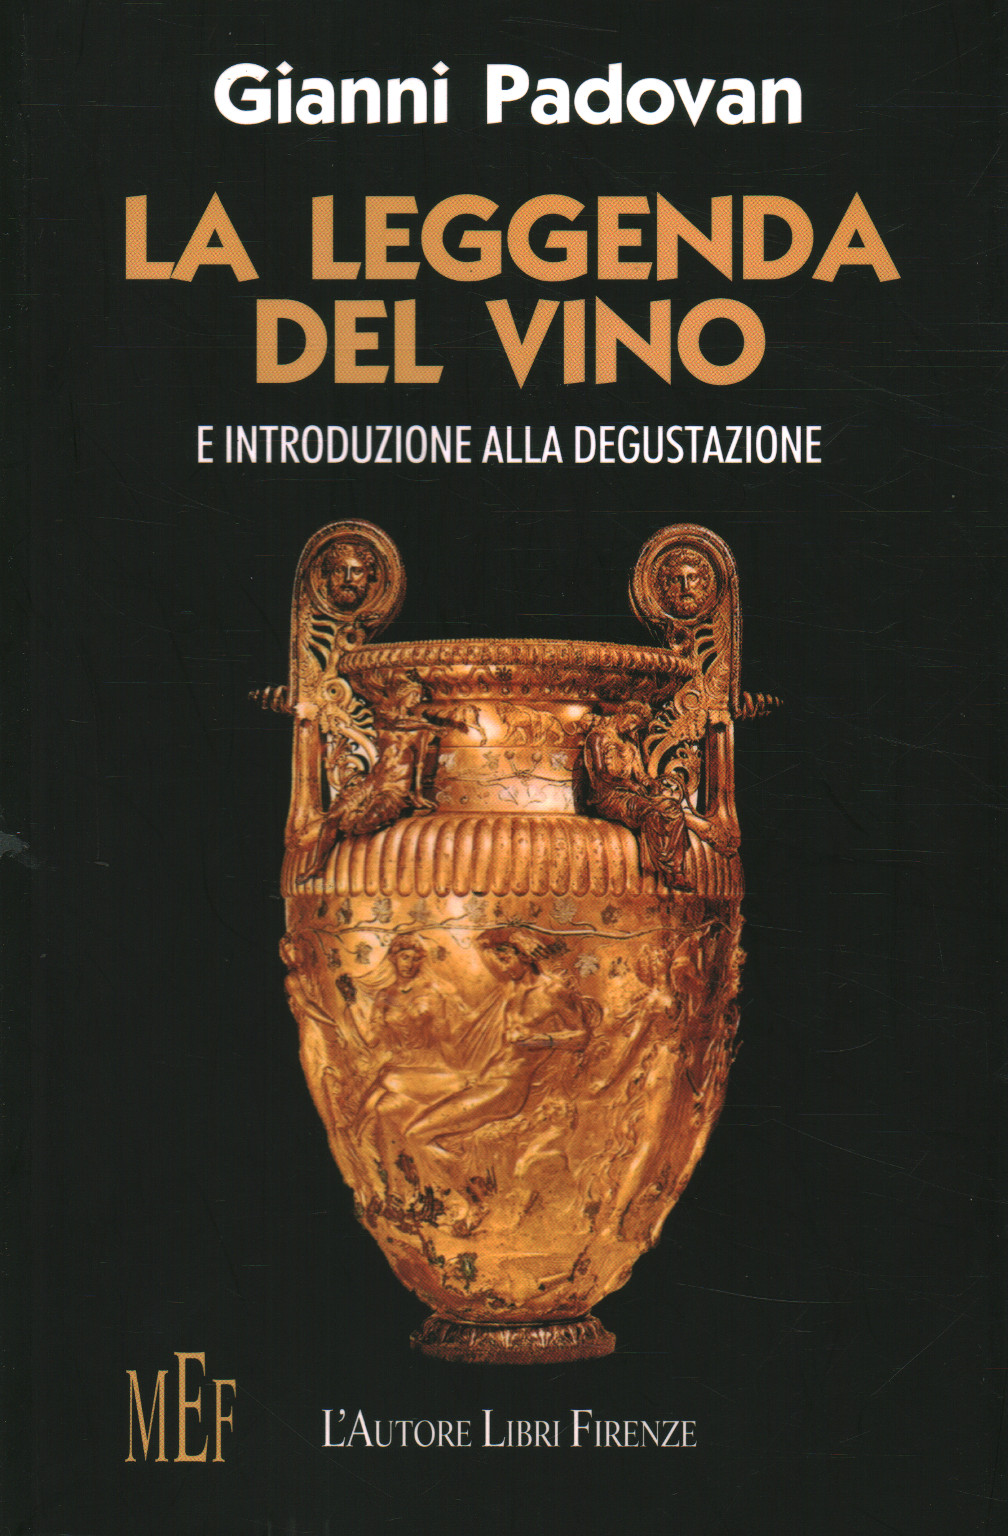 The legend of the wine and introduction to the degustazi, Gianni Padovan